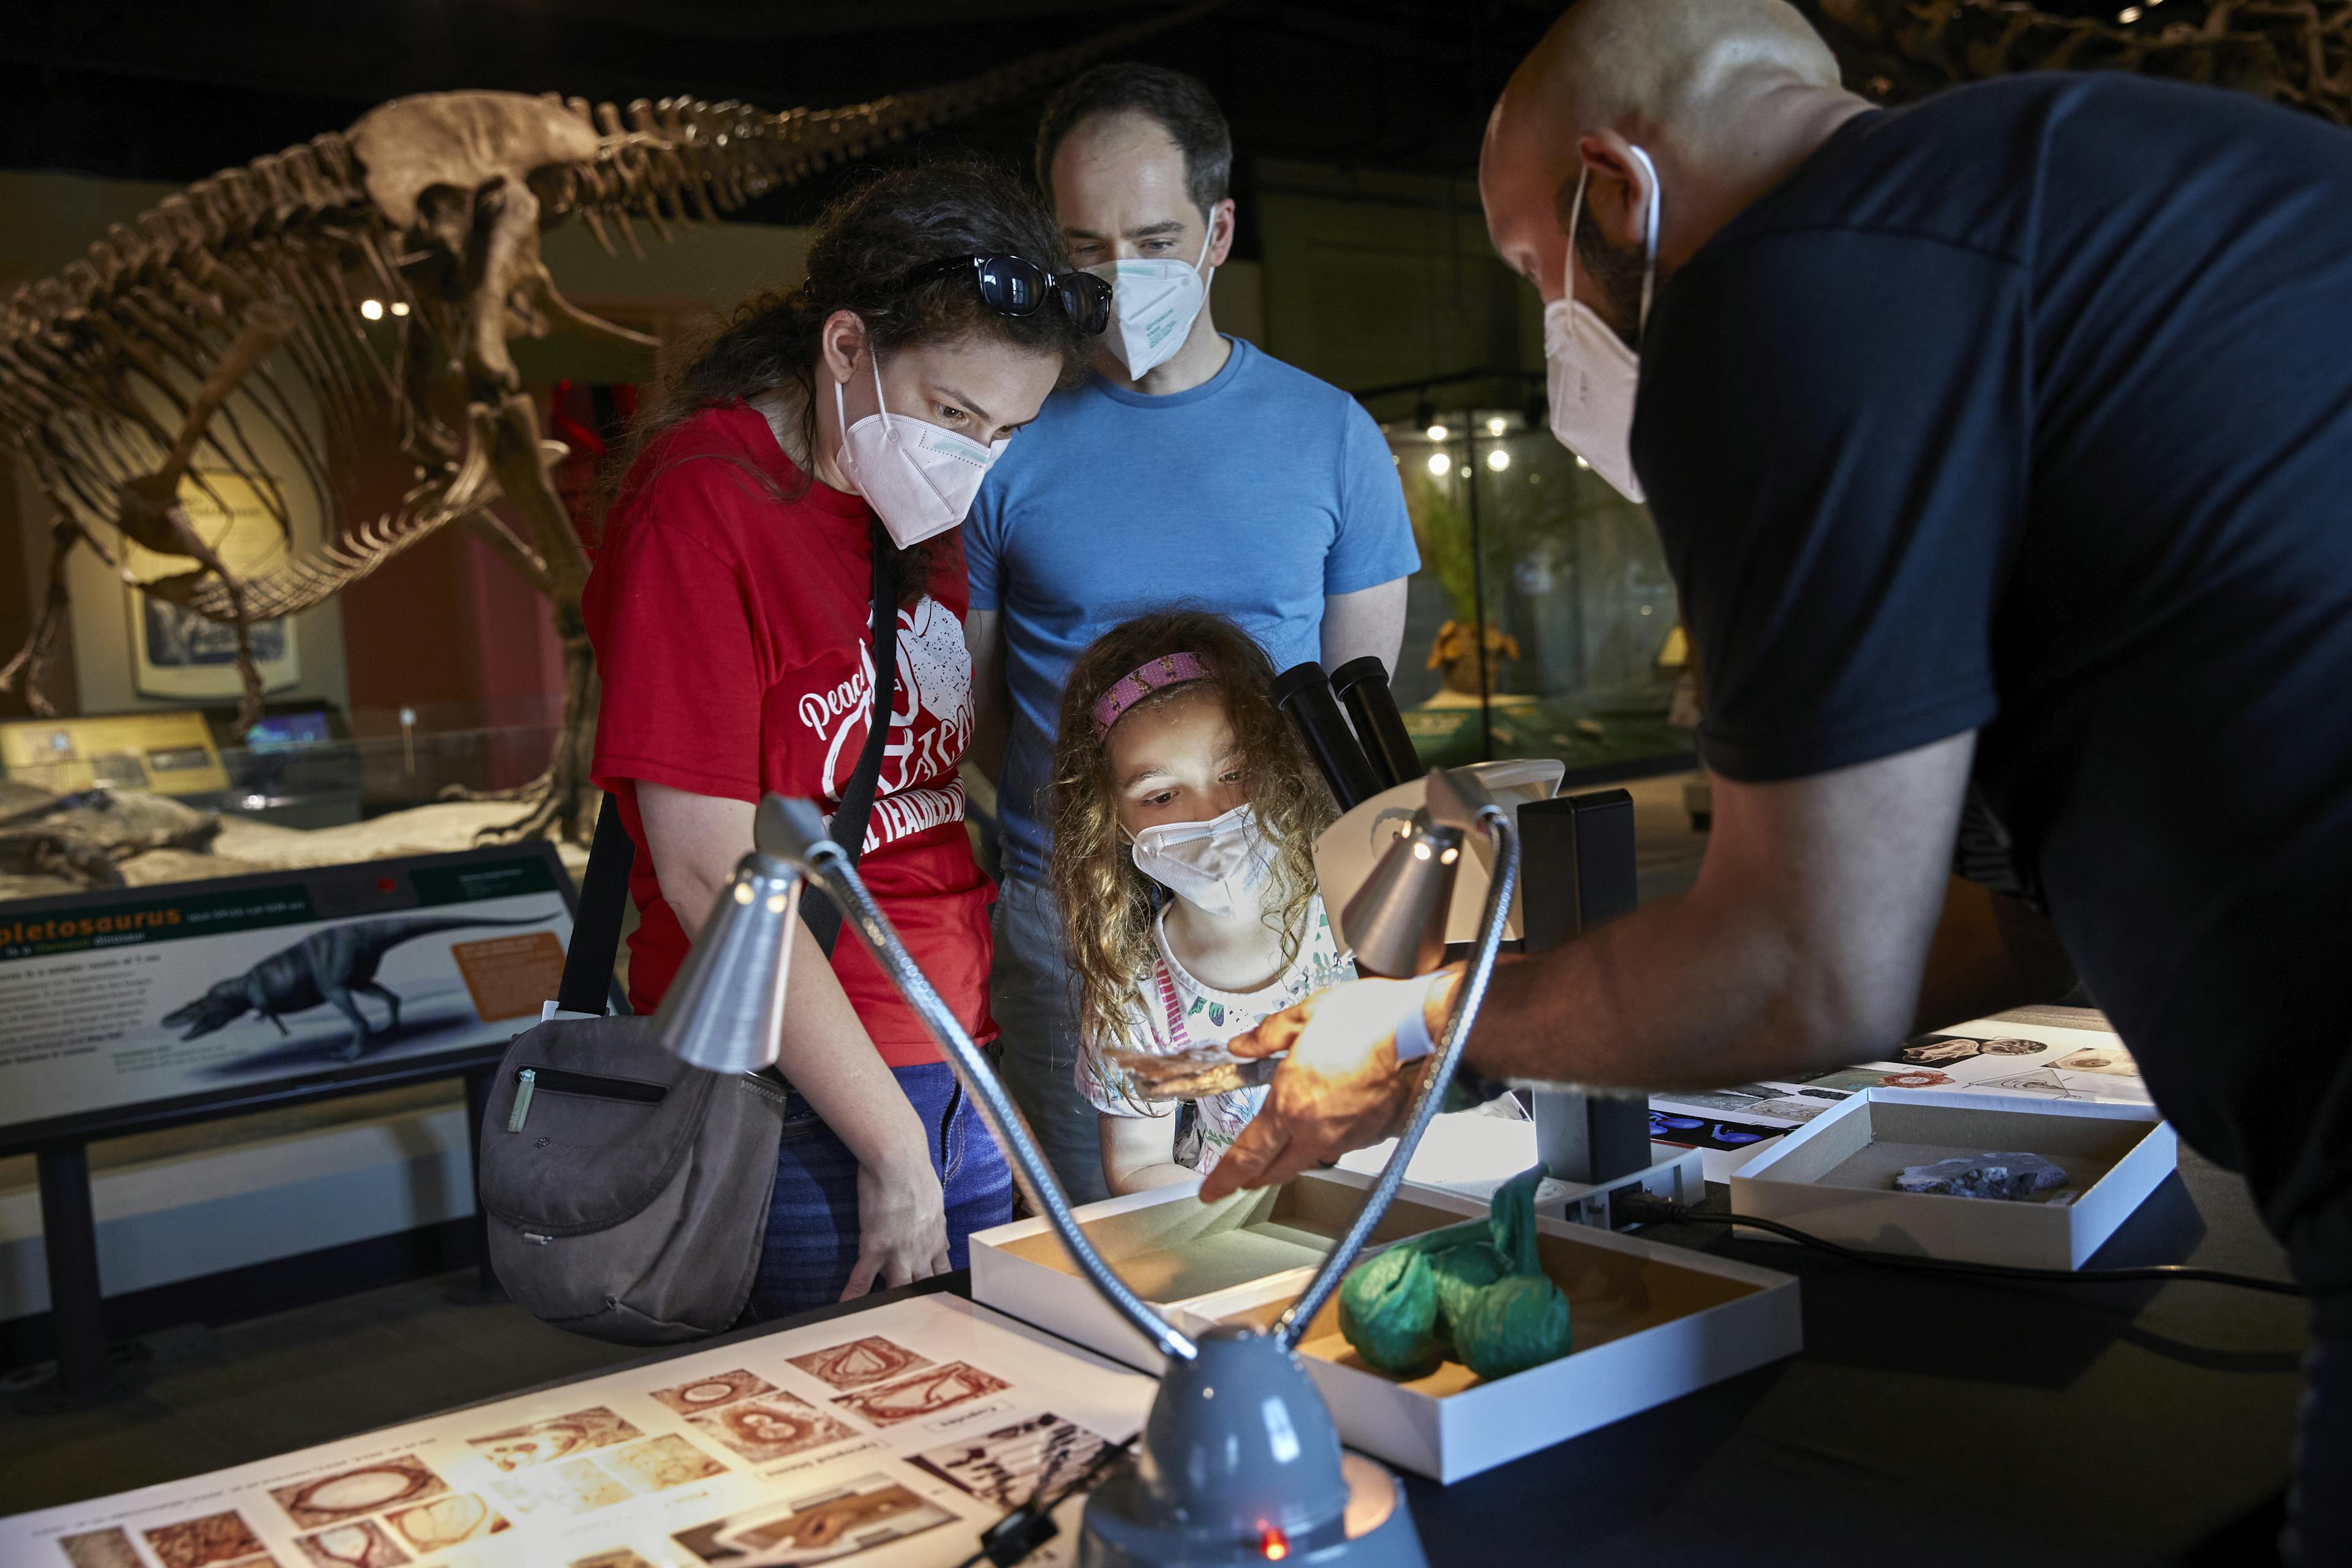 Two adults and a child stand at a table covered with specimens in a museum exhibition. They are looking at a specimen being held out by a museum staff member.